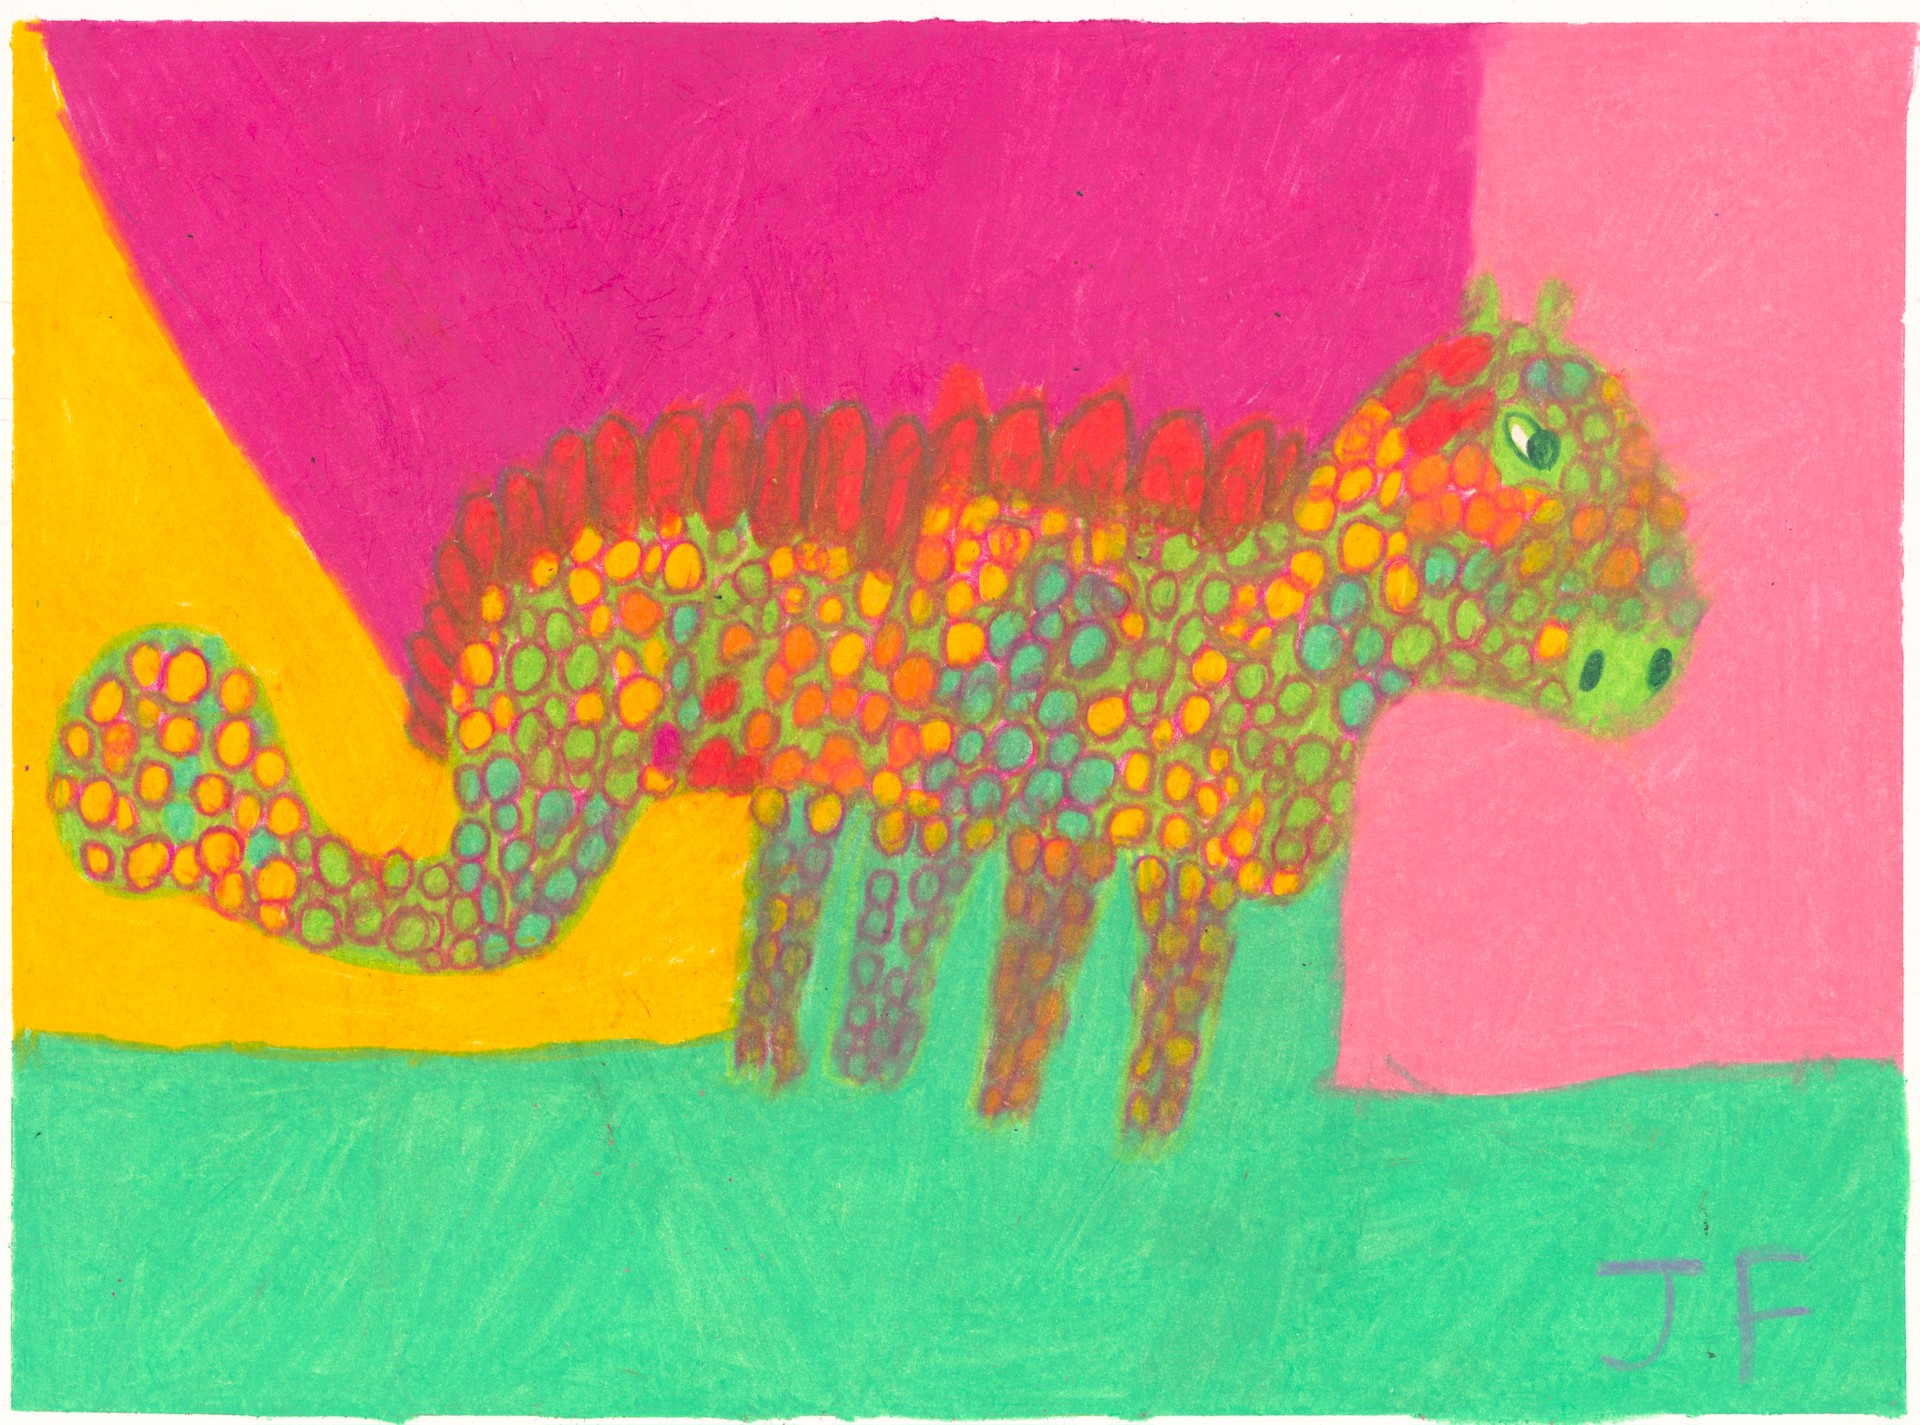 A Colorful Dinosaur by Josephine Finnell